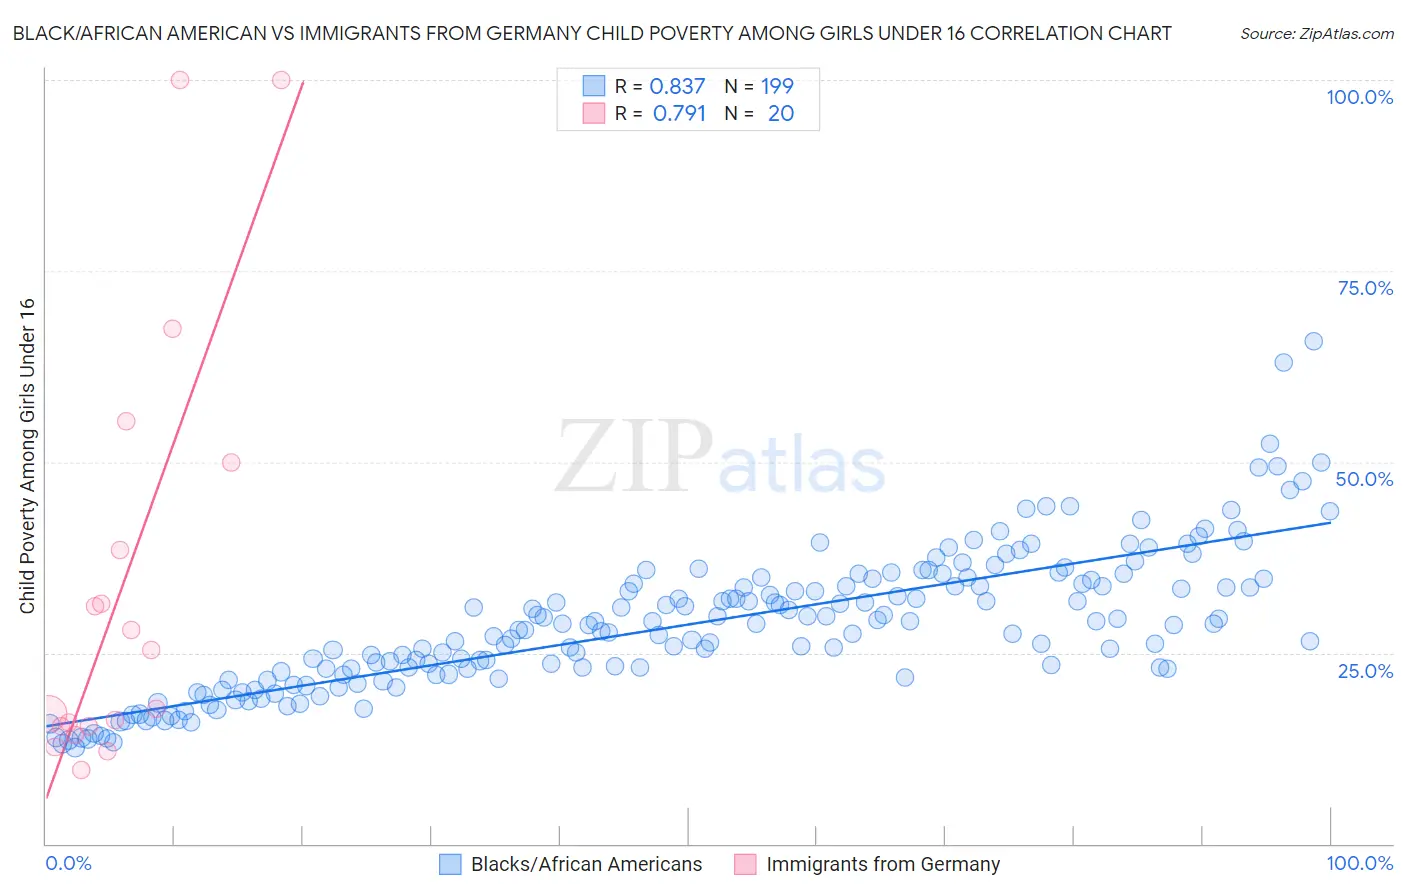 Black/African American vs Immigrants from Germany Child Poverty Among Girls Under 16